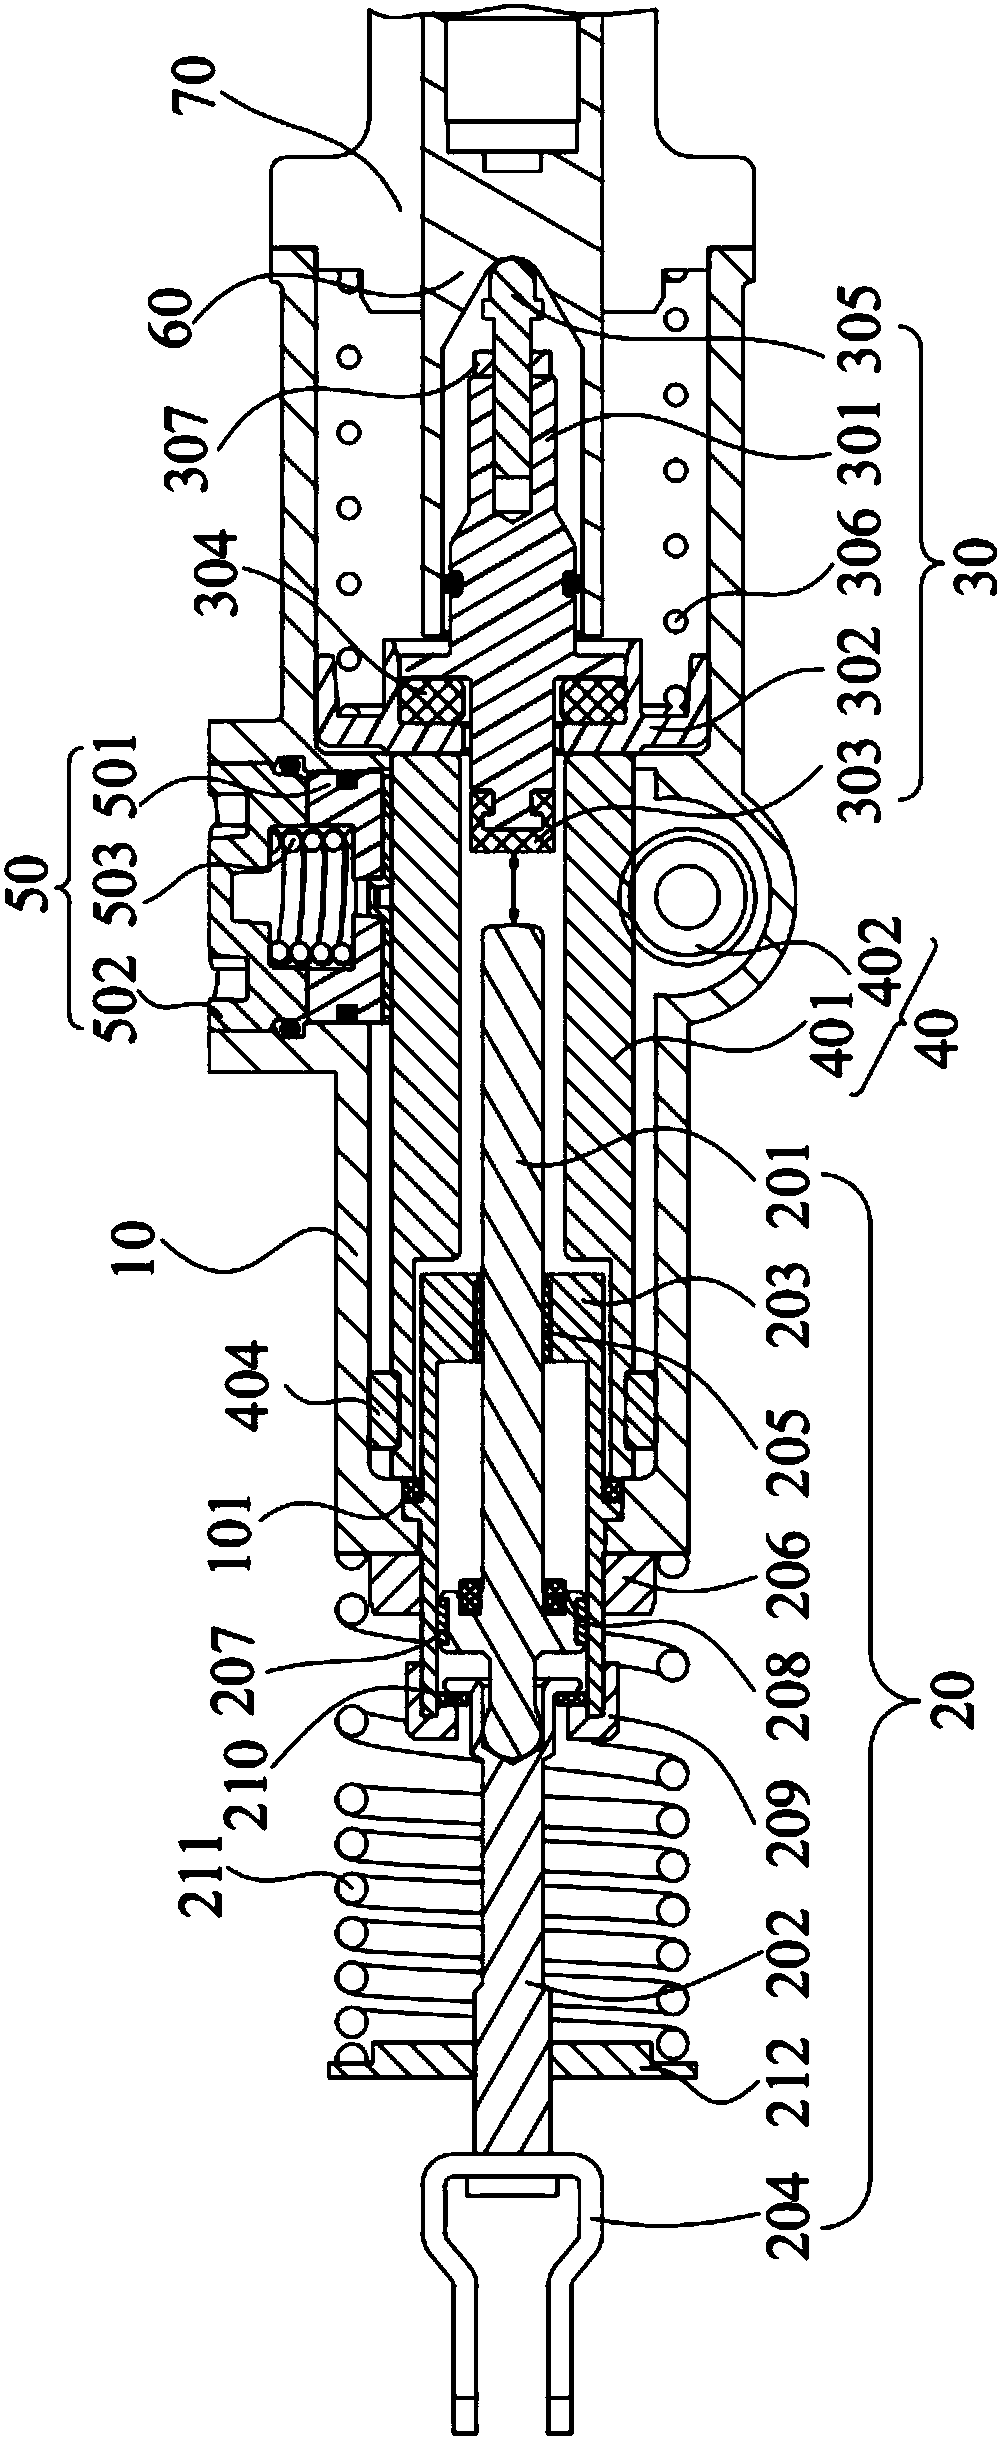 Electric brake booster for automobile